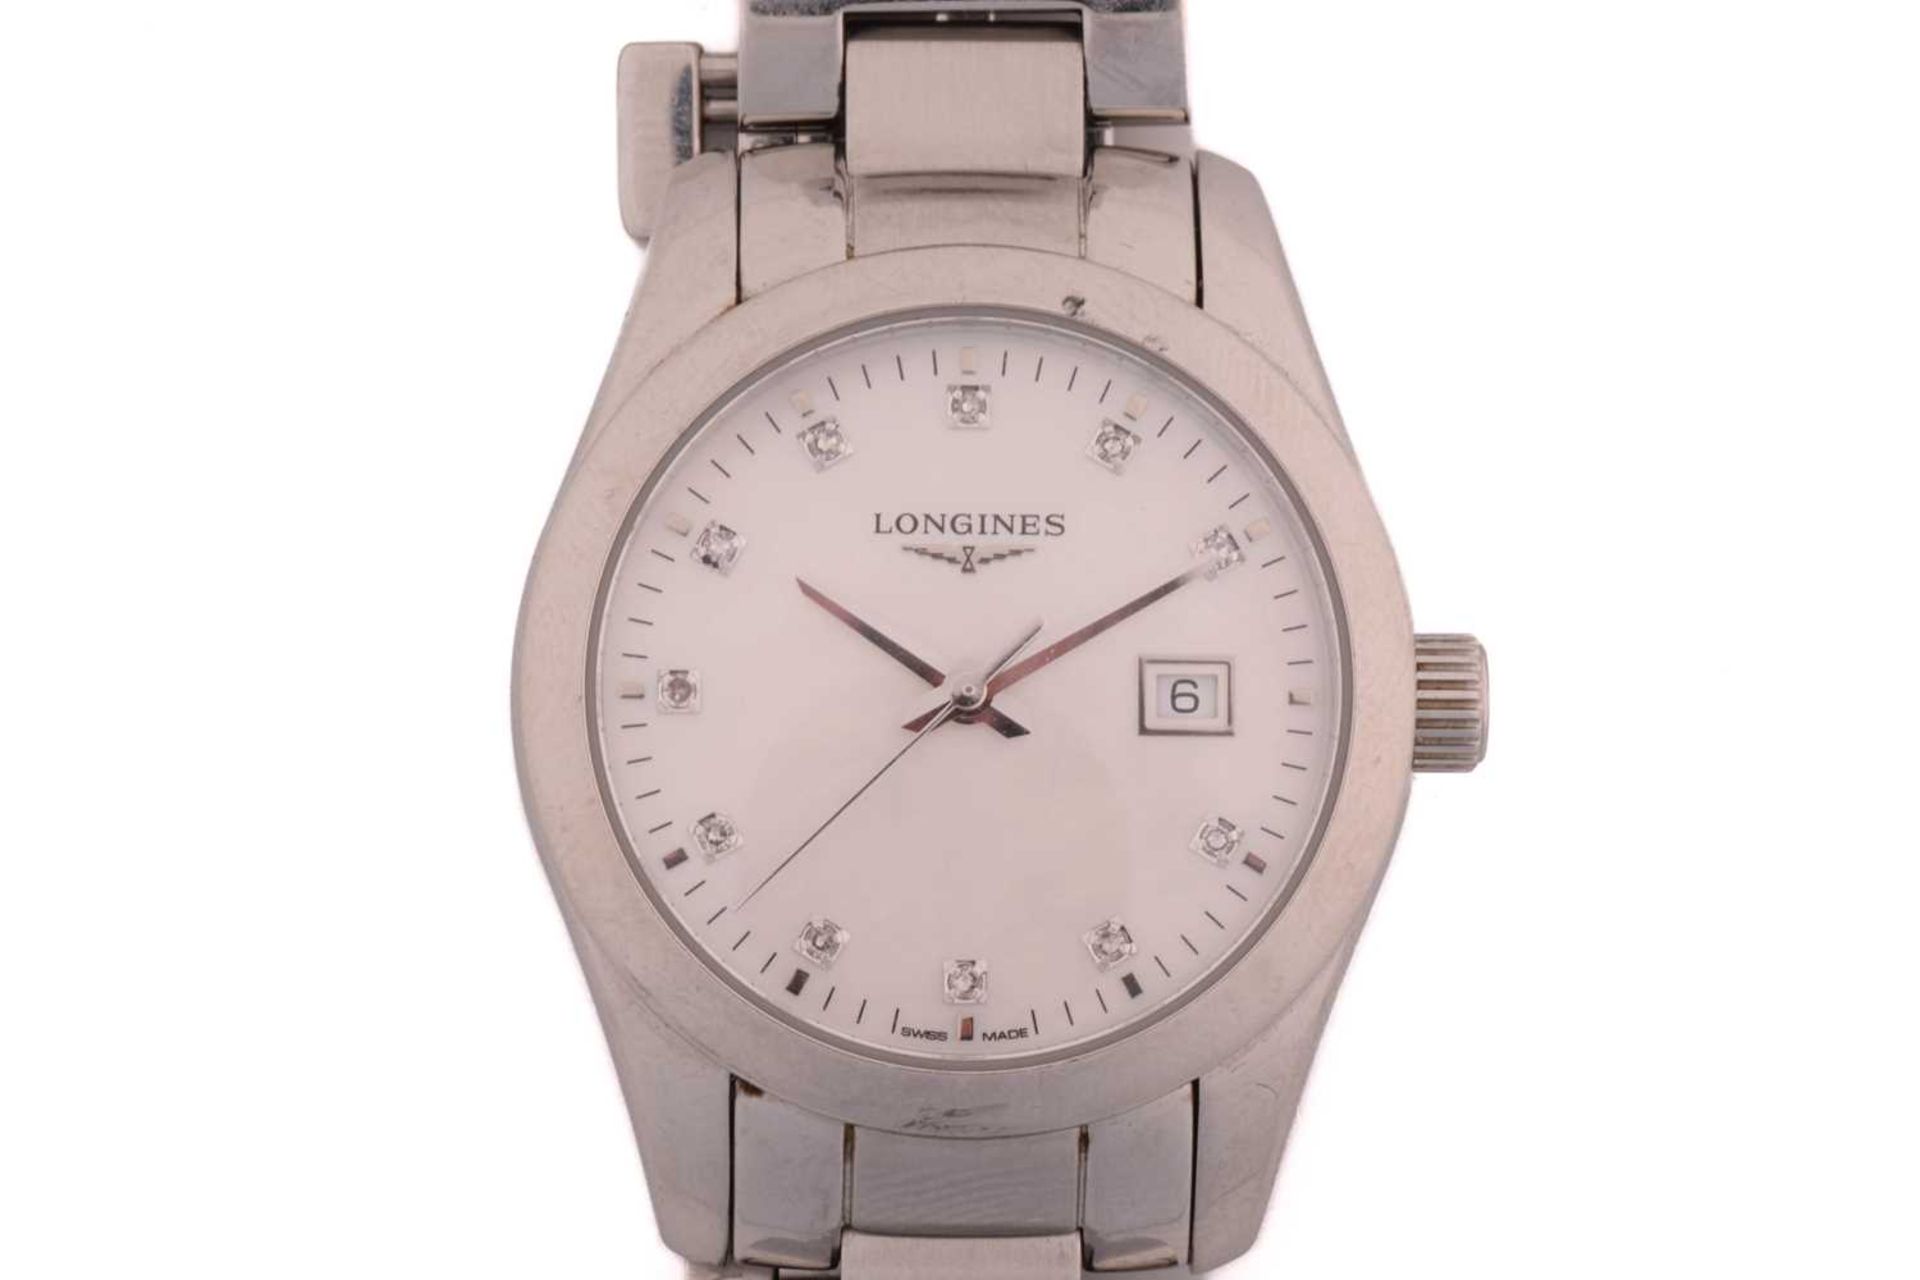 A Longines Classic lady's wristwatch, featuring a Swiss-made quartz movement in a steel case